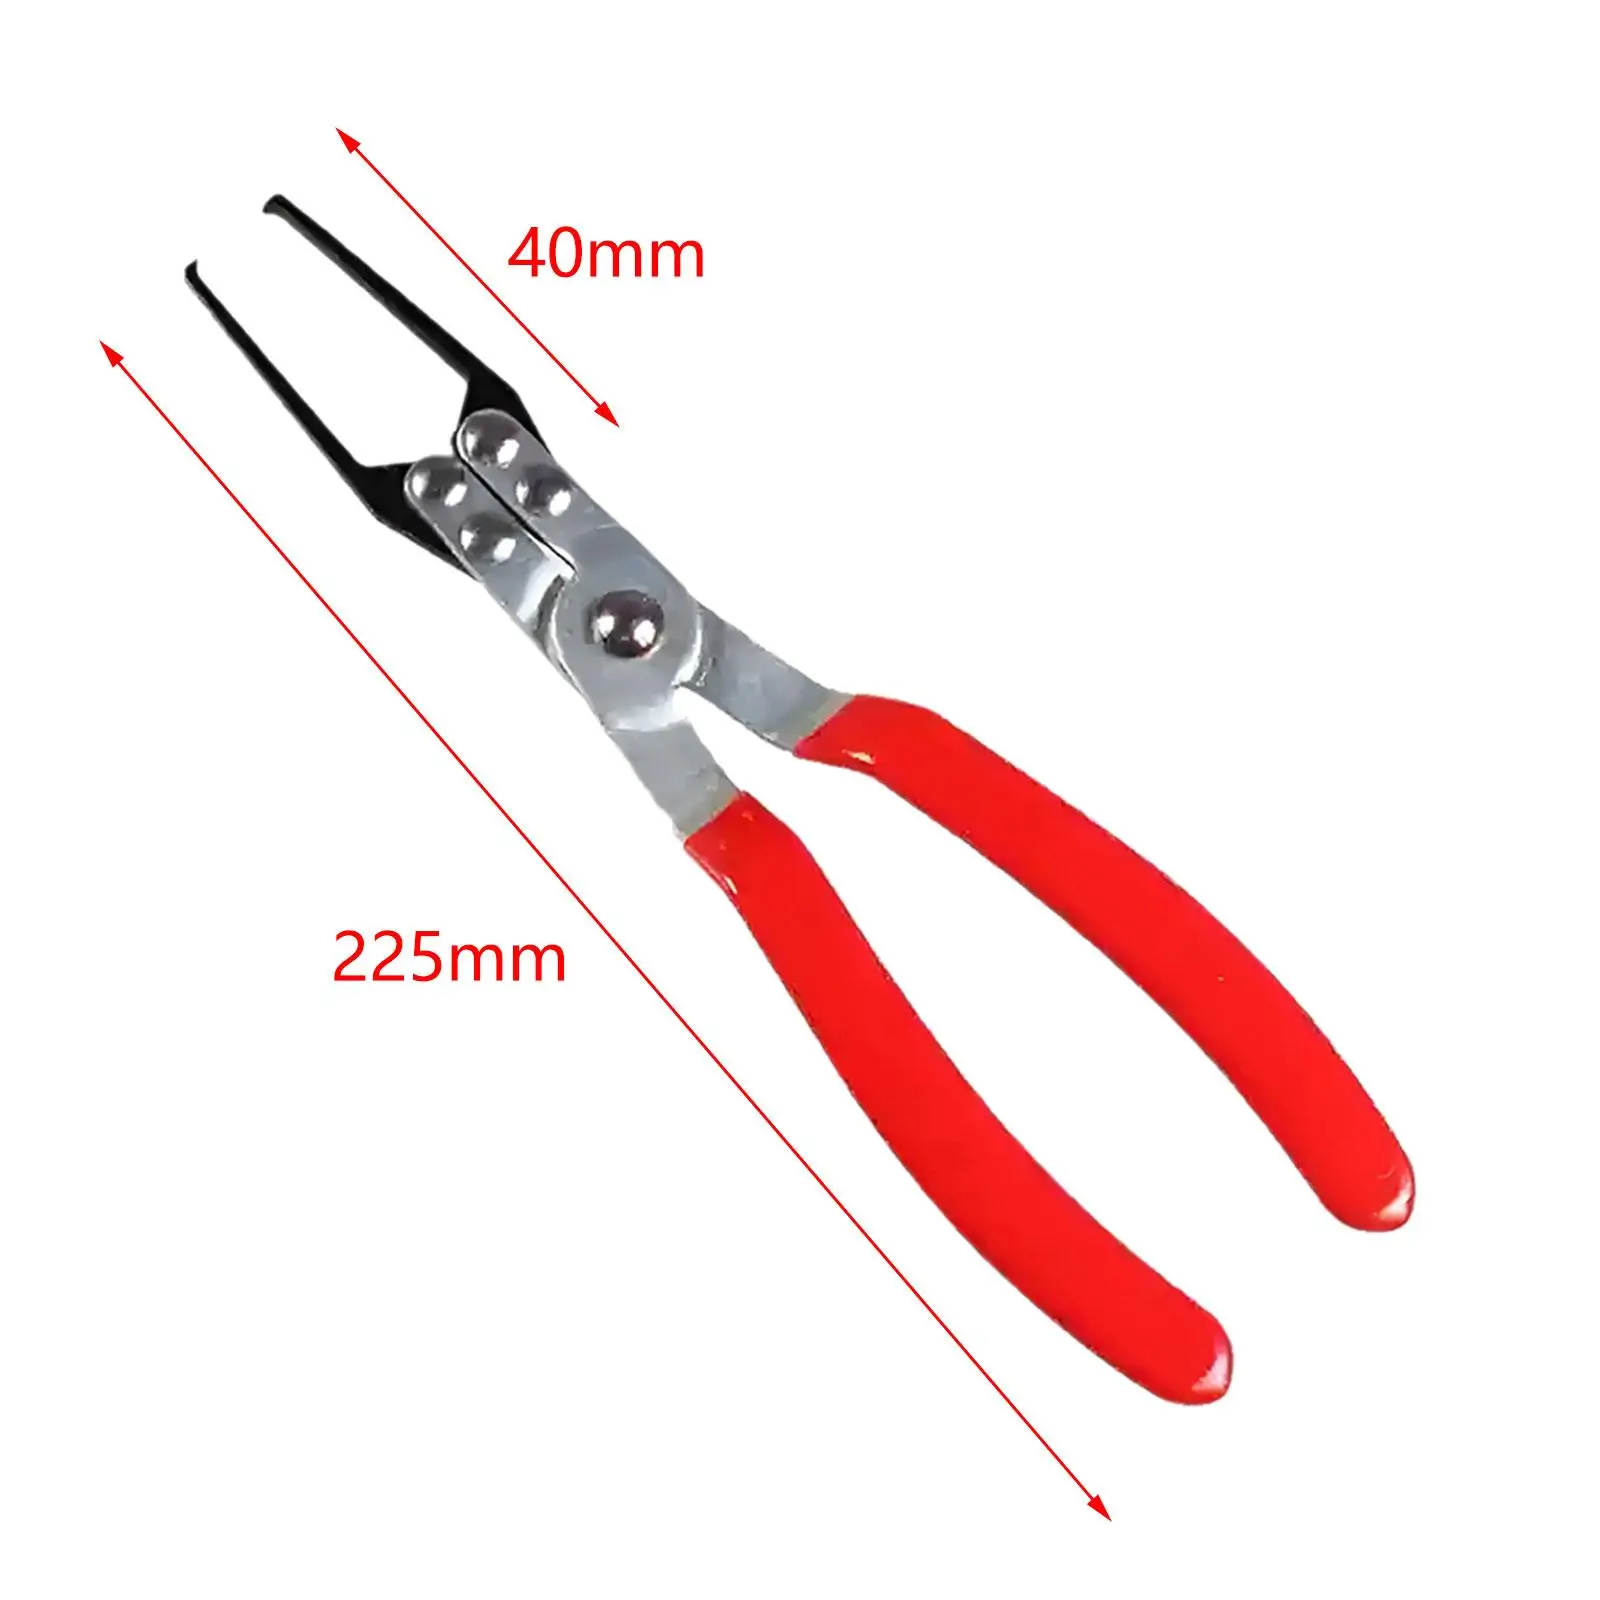 Generic Puller Plier Comfortable Grip Hand Tool Fuse Remover